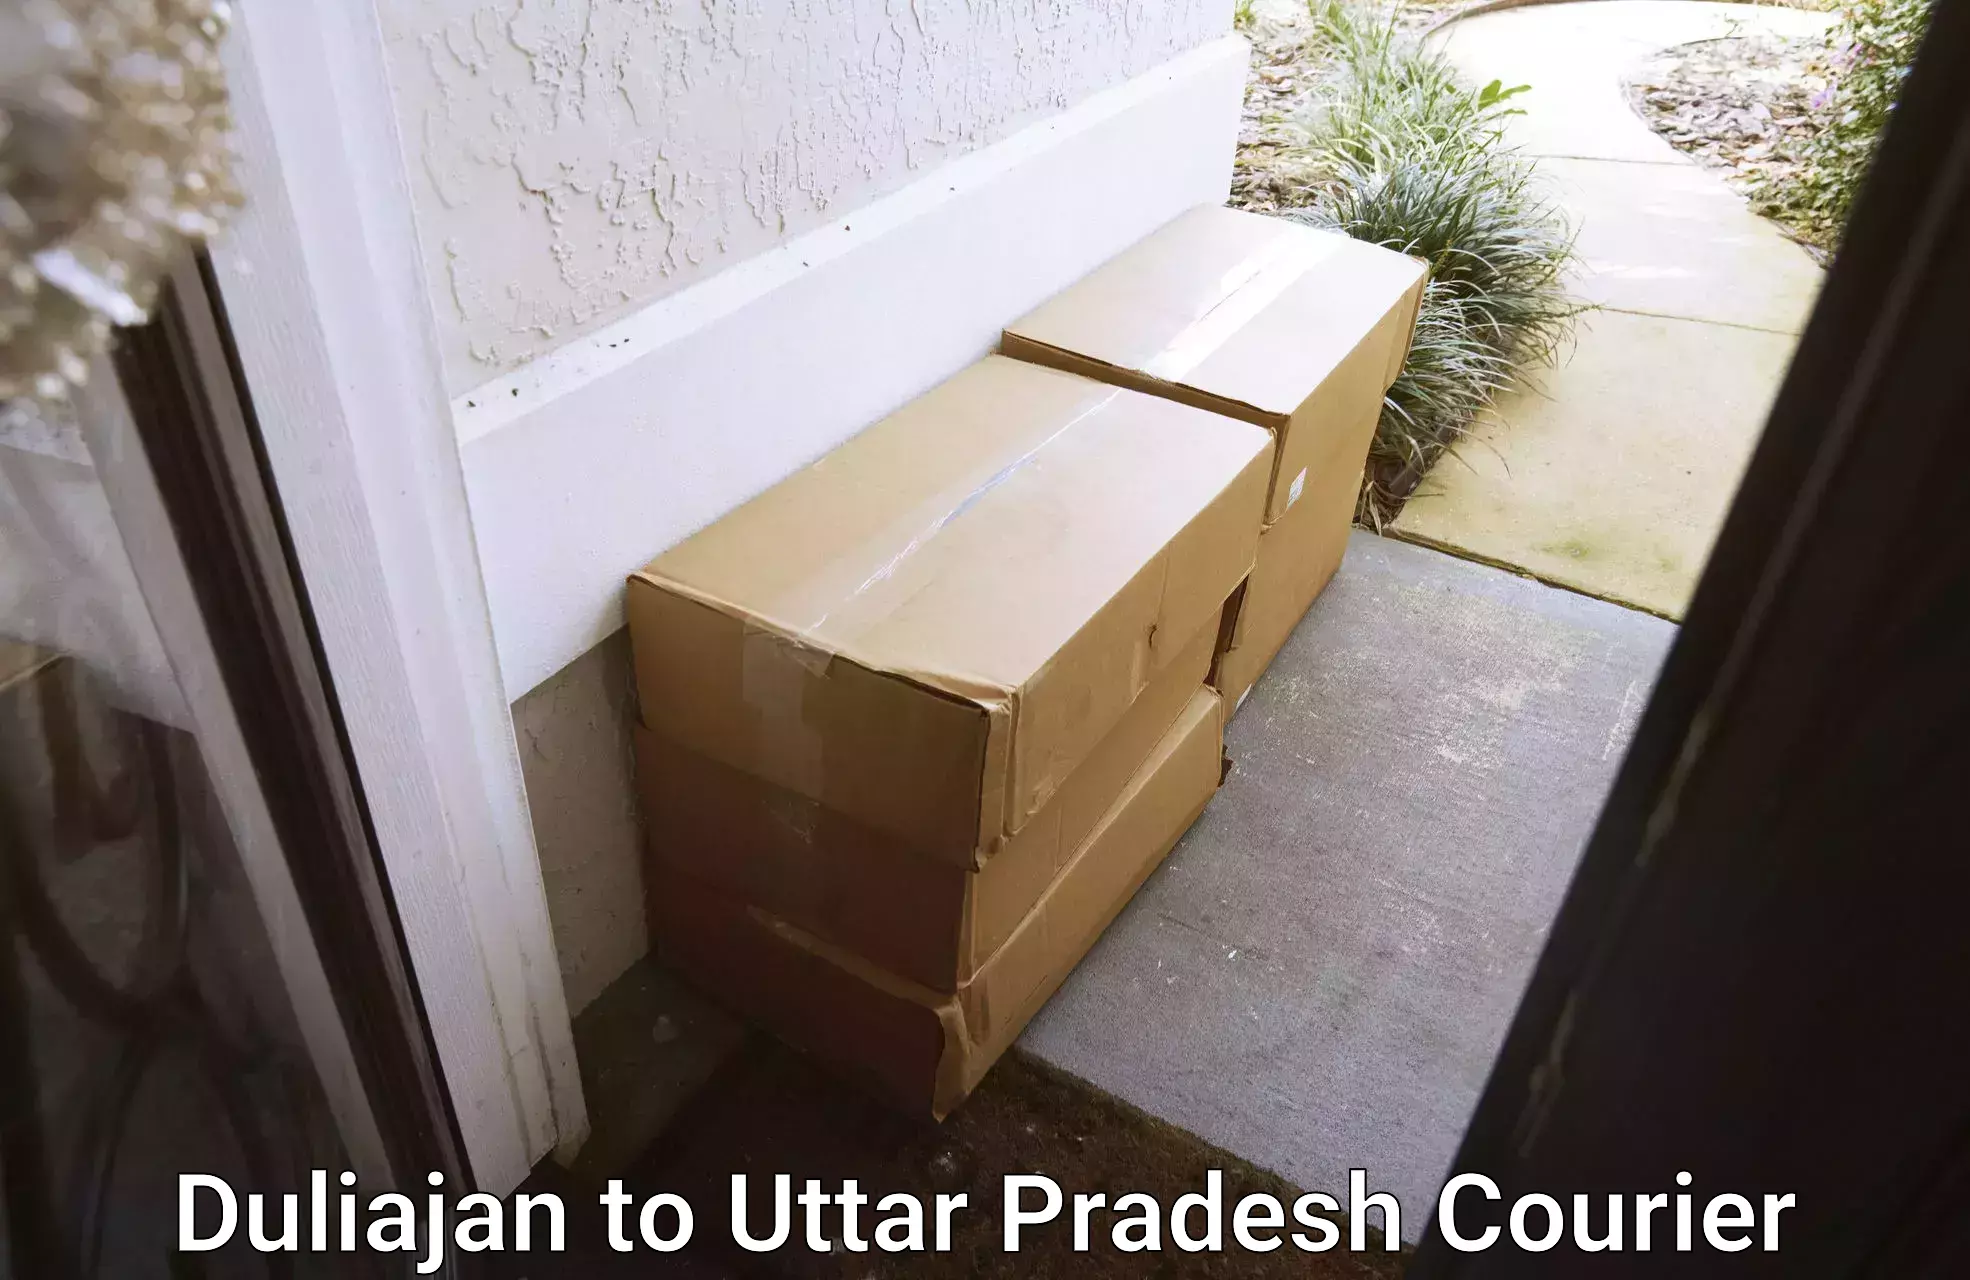 Parcel handling and care Duliajan to Fatehpur